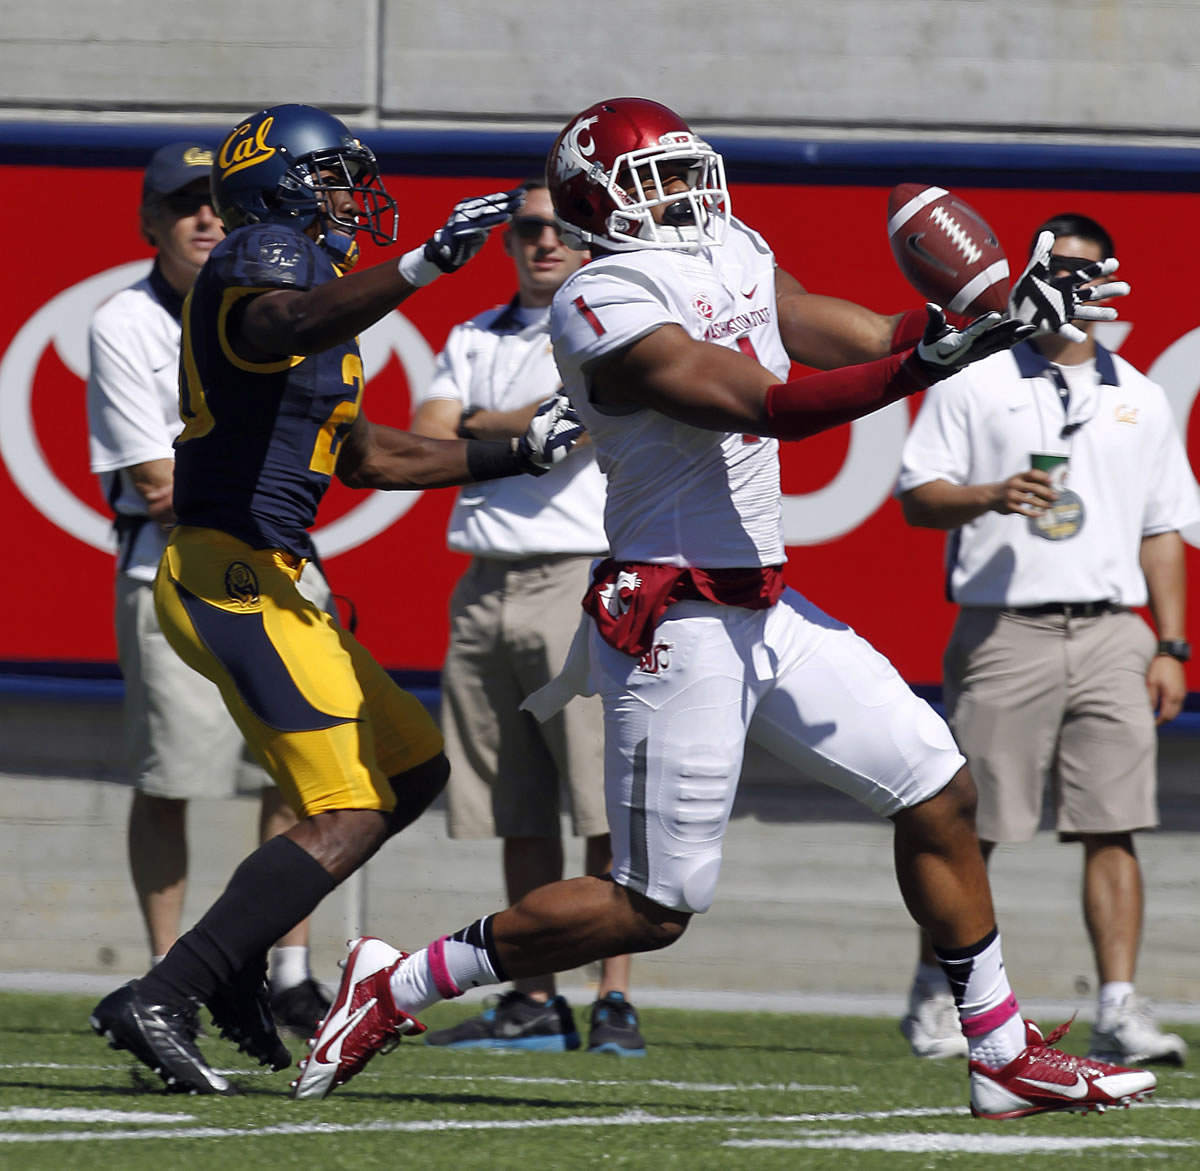 Washington State wide receiver Vince Mayle (1) catches a touchdown pass against California defensive back Isaac Lapite (20) during the first half Saturday.